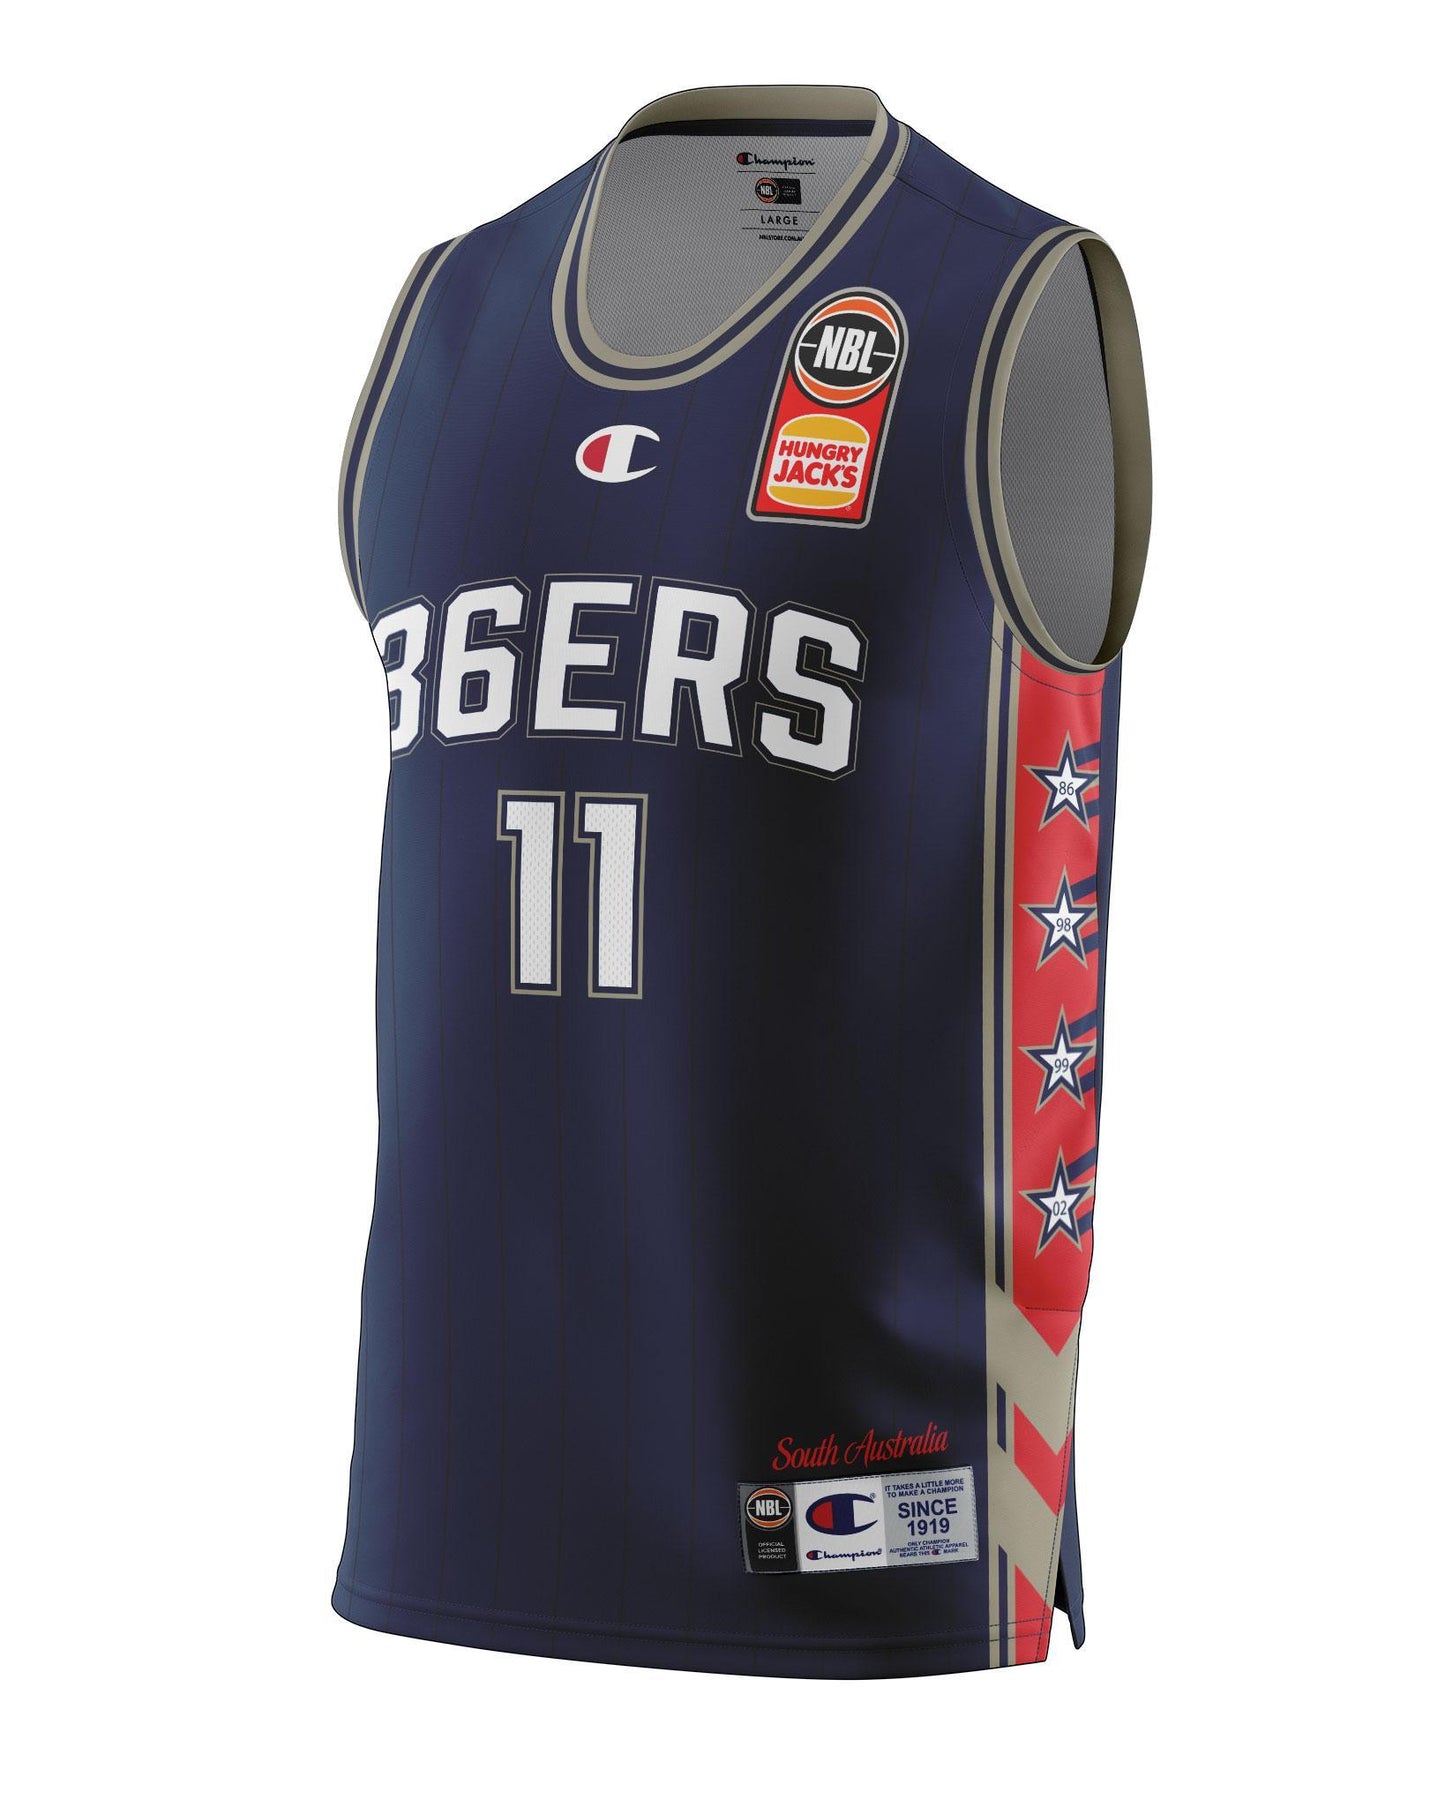 Adelaide 36ers 2021/22 Authentic Adult Home Jersey - Kai Sotto